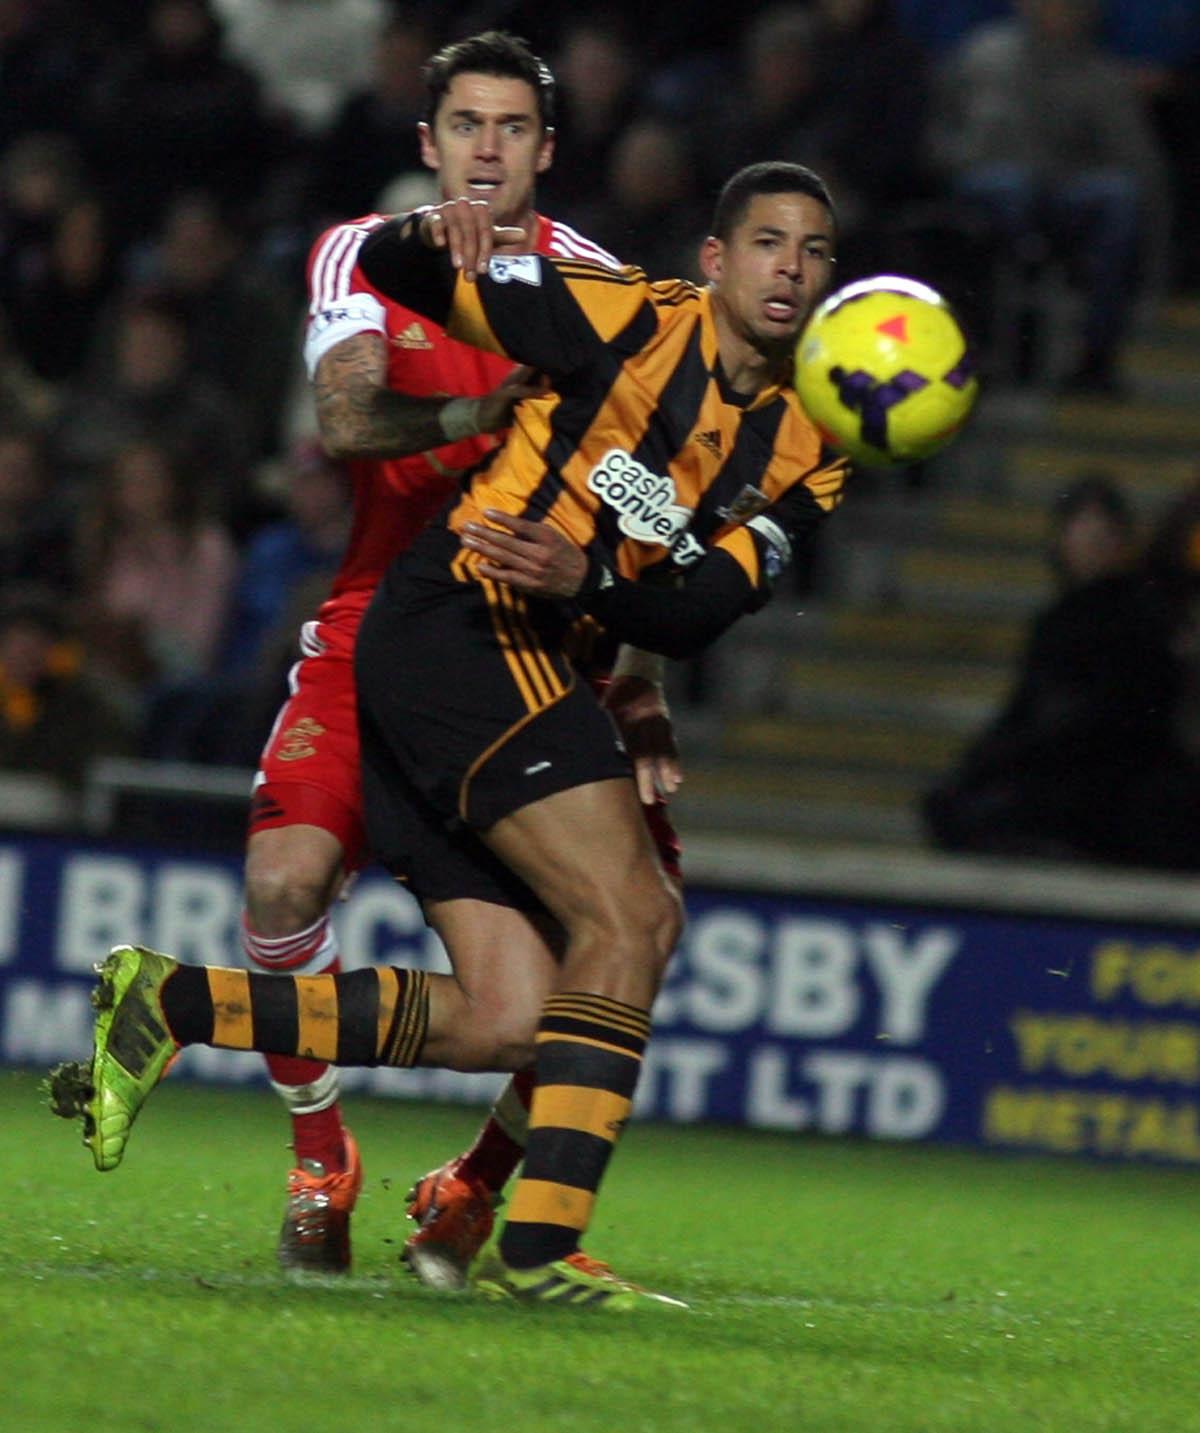 Pictures from Hull City v Saints. The unauthorised downloading, editing, copying. or distribution of this image is strictly prohibited.